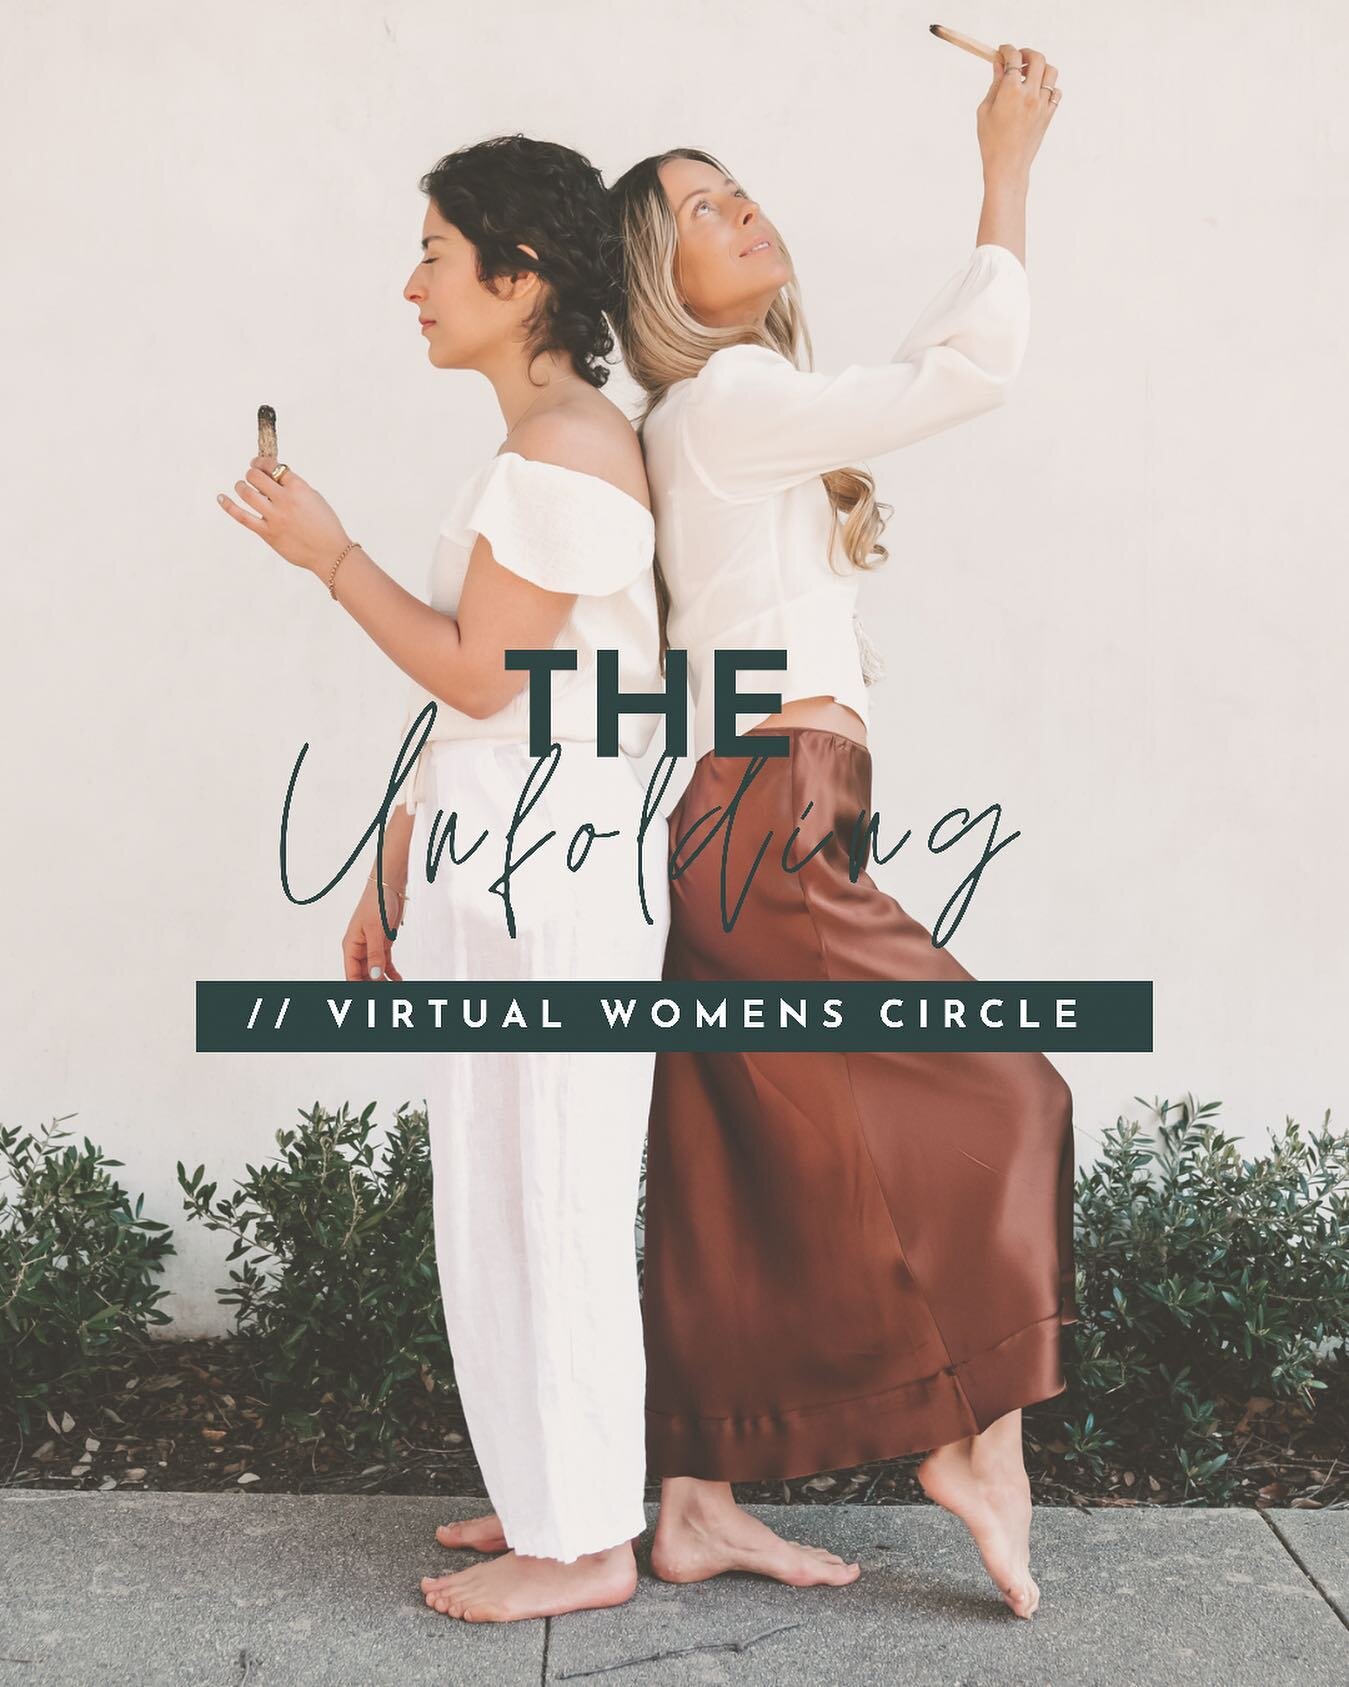 THE POWER OF SITTING IN CIRCLE🤍

Healing circles are a group of people coming together with a shared goal of creating a sacred space for collective healing and transformation. 

Women have gathered for thousands of years to share their stories, cele